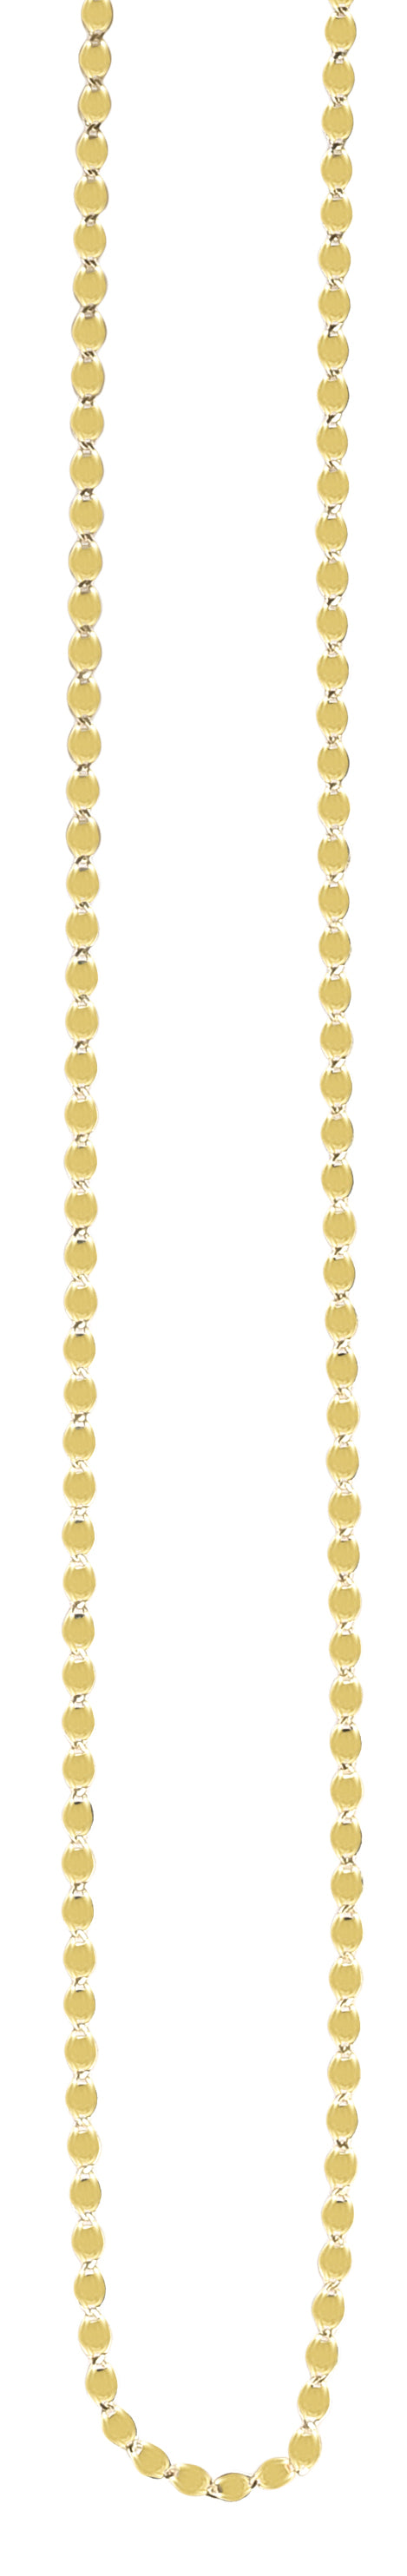 14K Gold 2.2mm Oval Mirror Link Chain